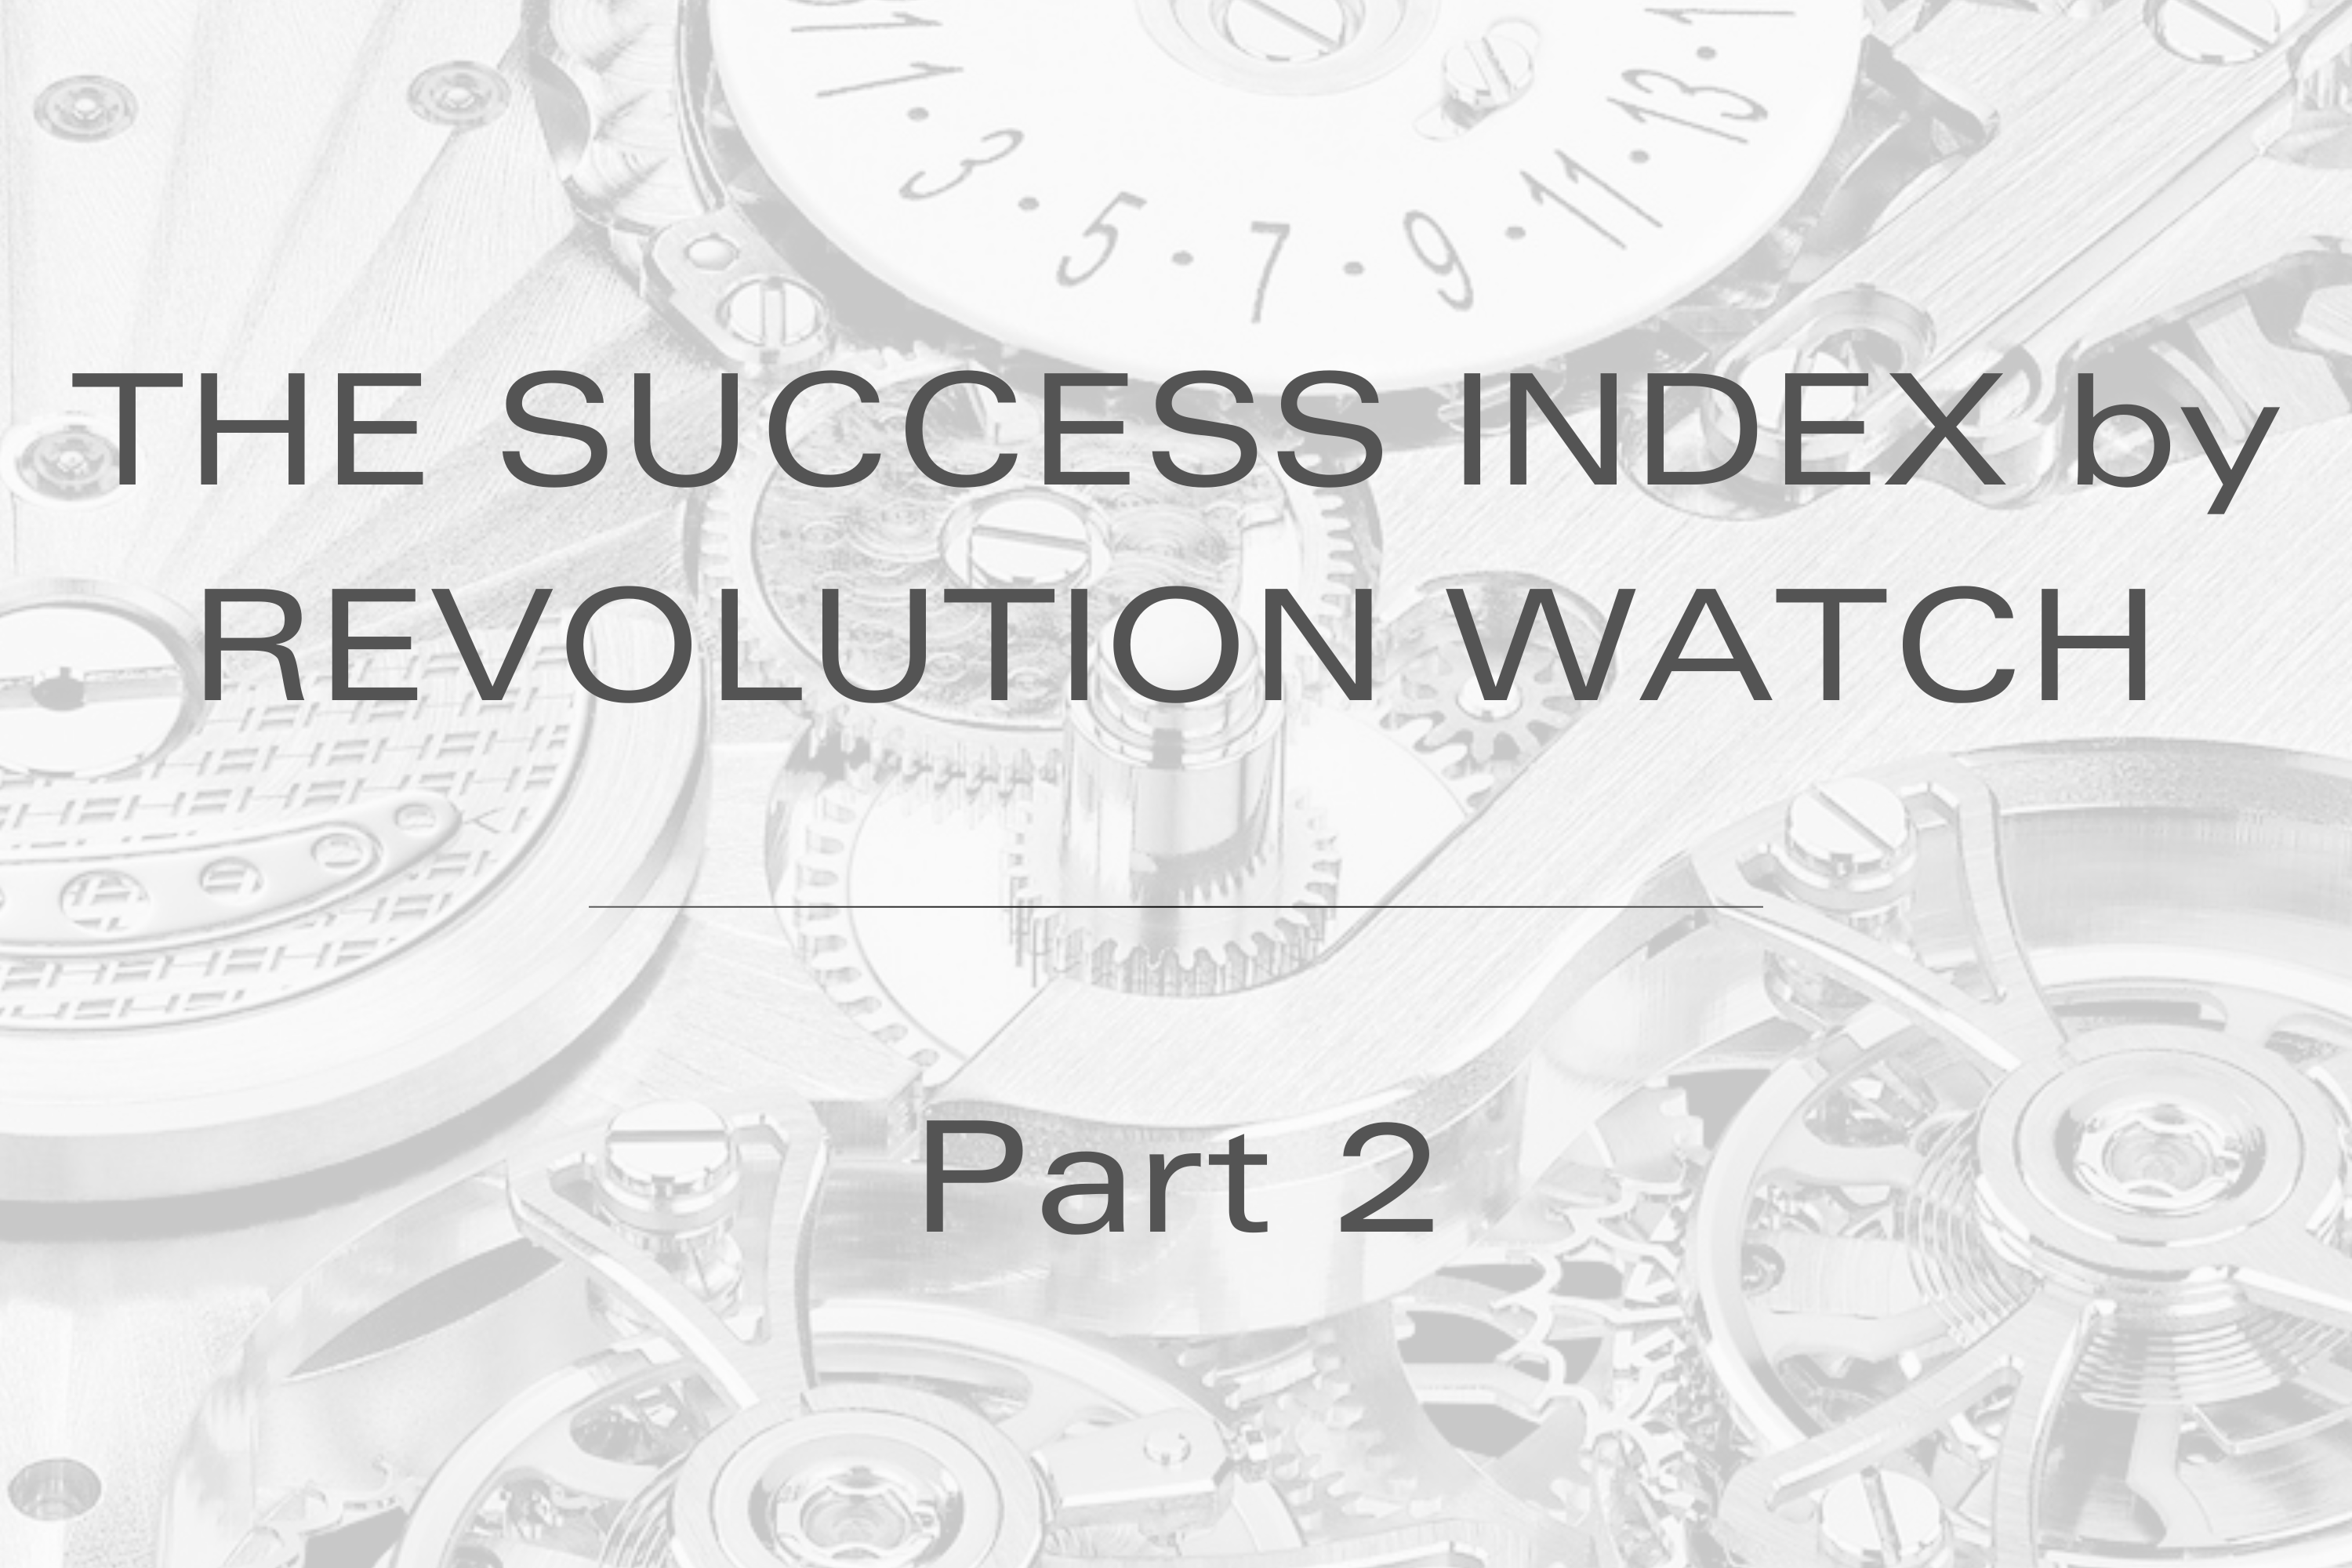 THE SUCCESS INDEX by REVOLUTION WATCH | PART 2